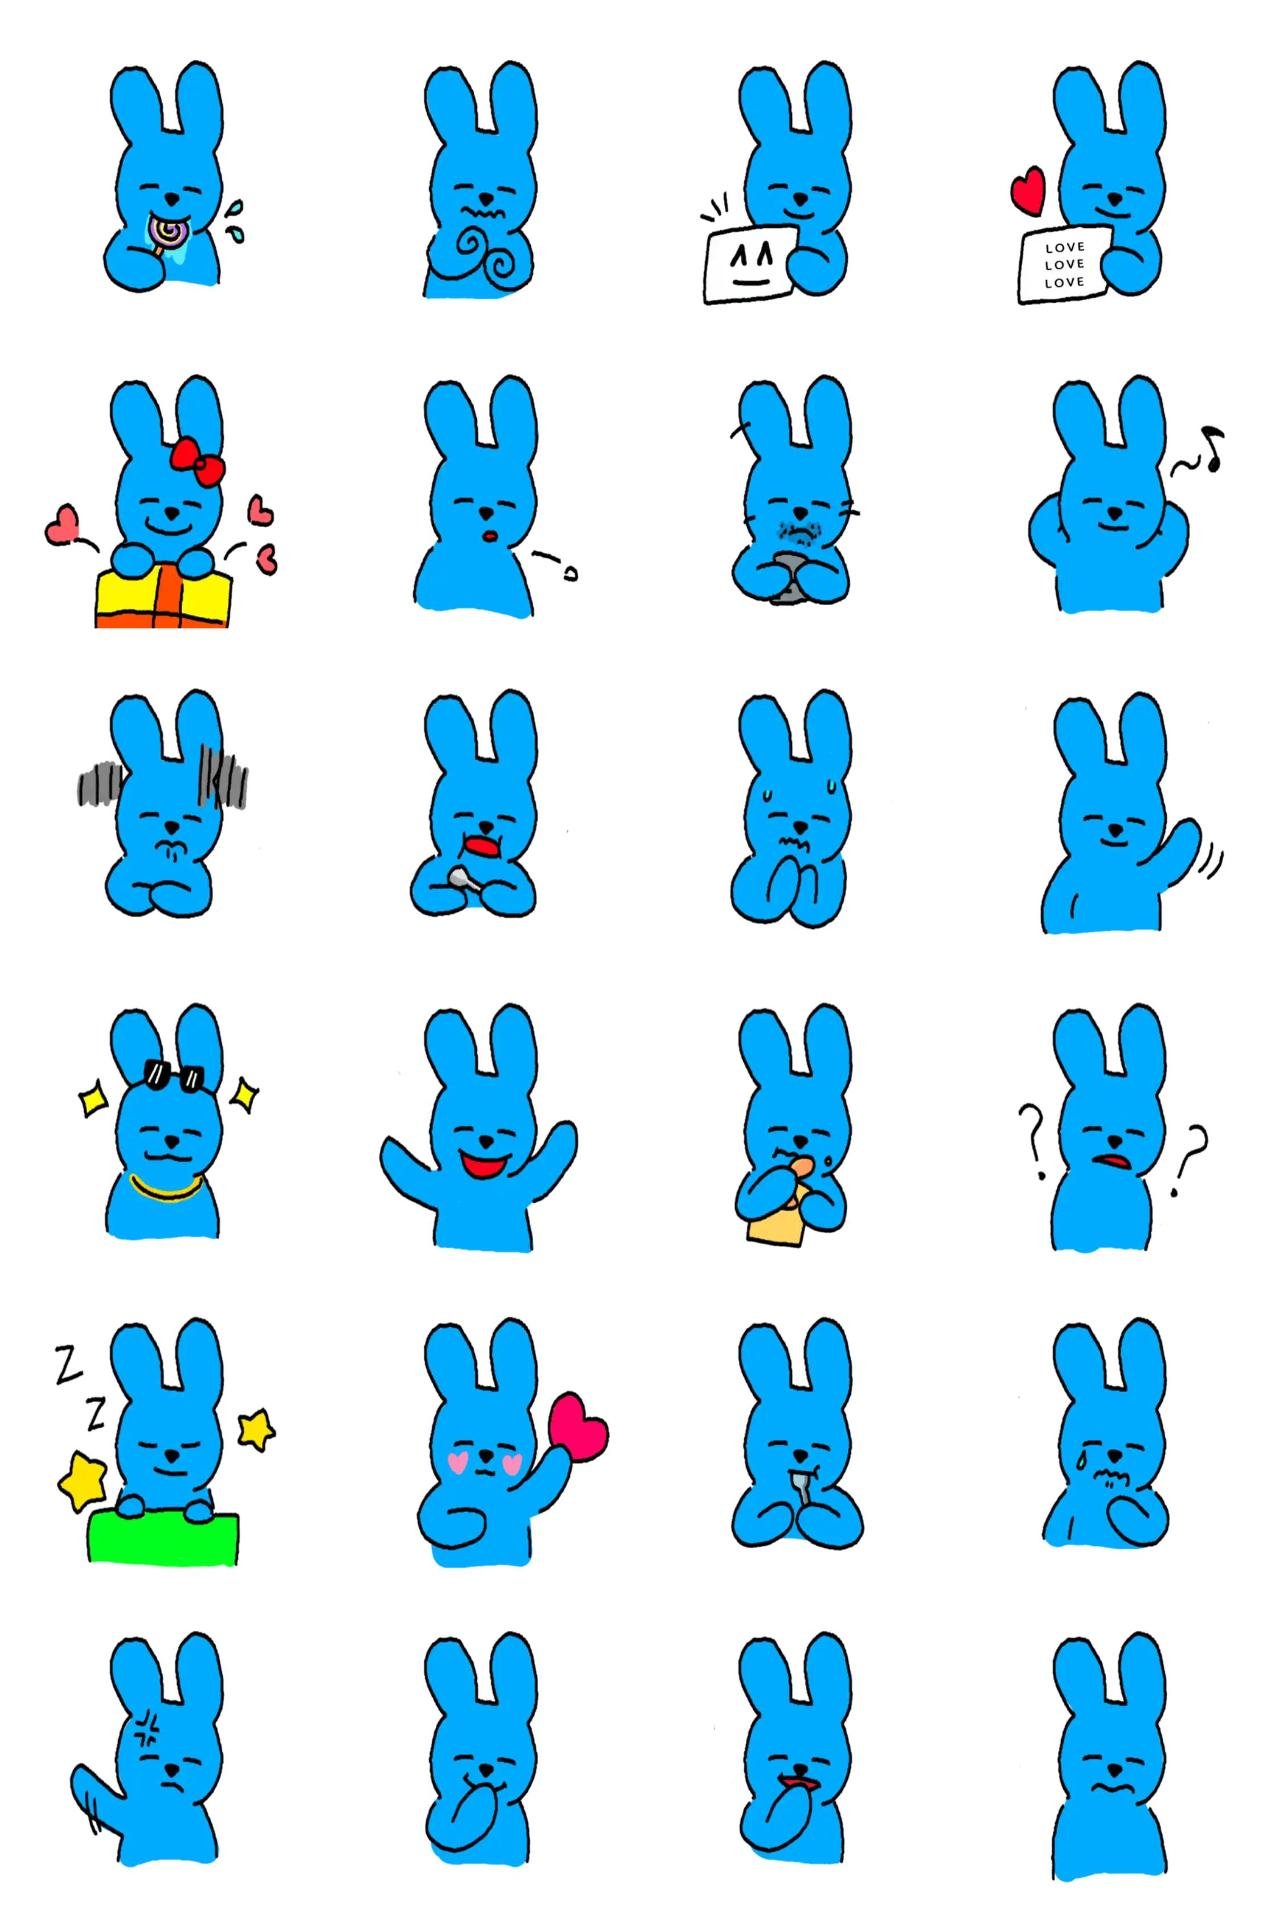 Cheeky Blue Rabiit Animals sticker pack for Whatsapp, Telegram, Signal, and others chatting and message apps